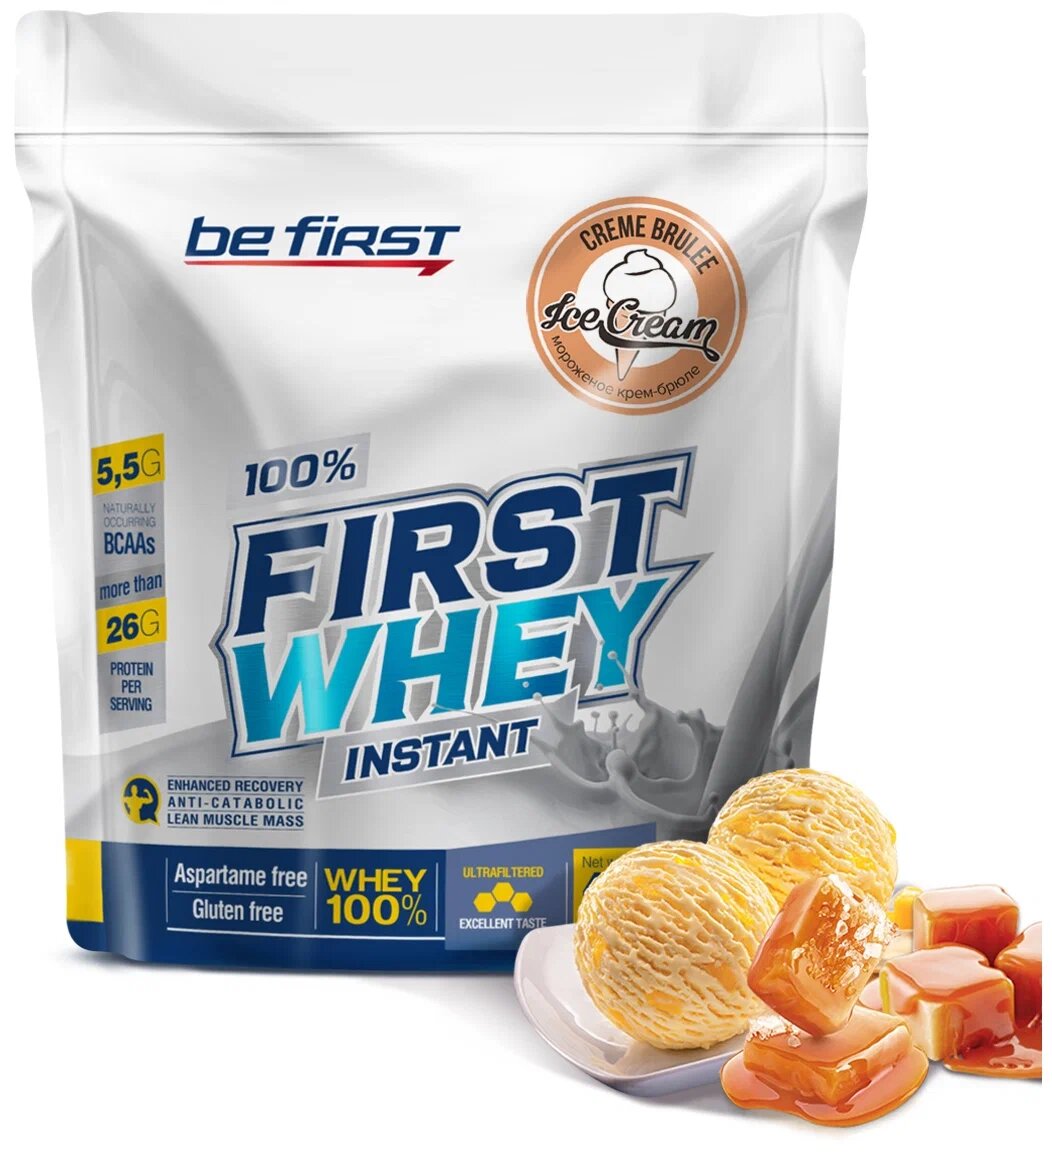 Be First Whey Instant 420 г Крем-брюле